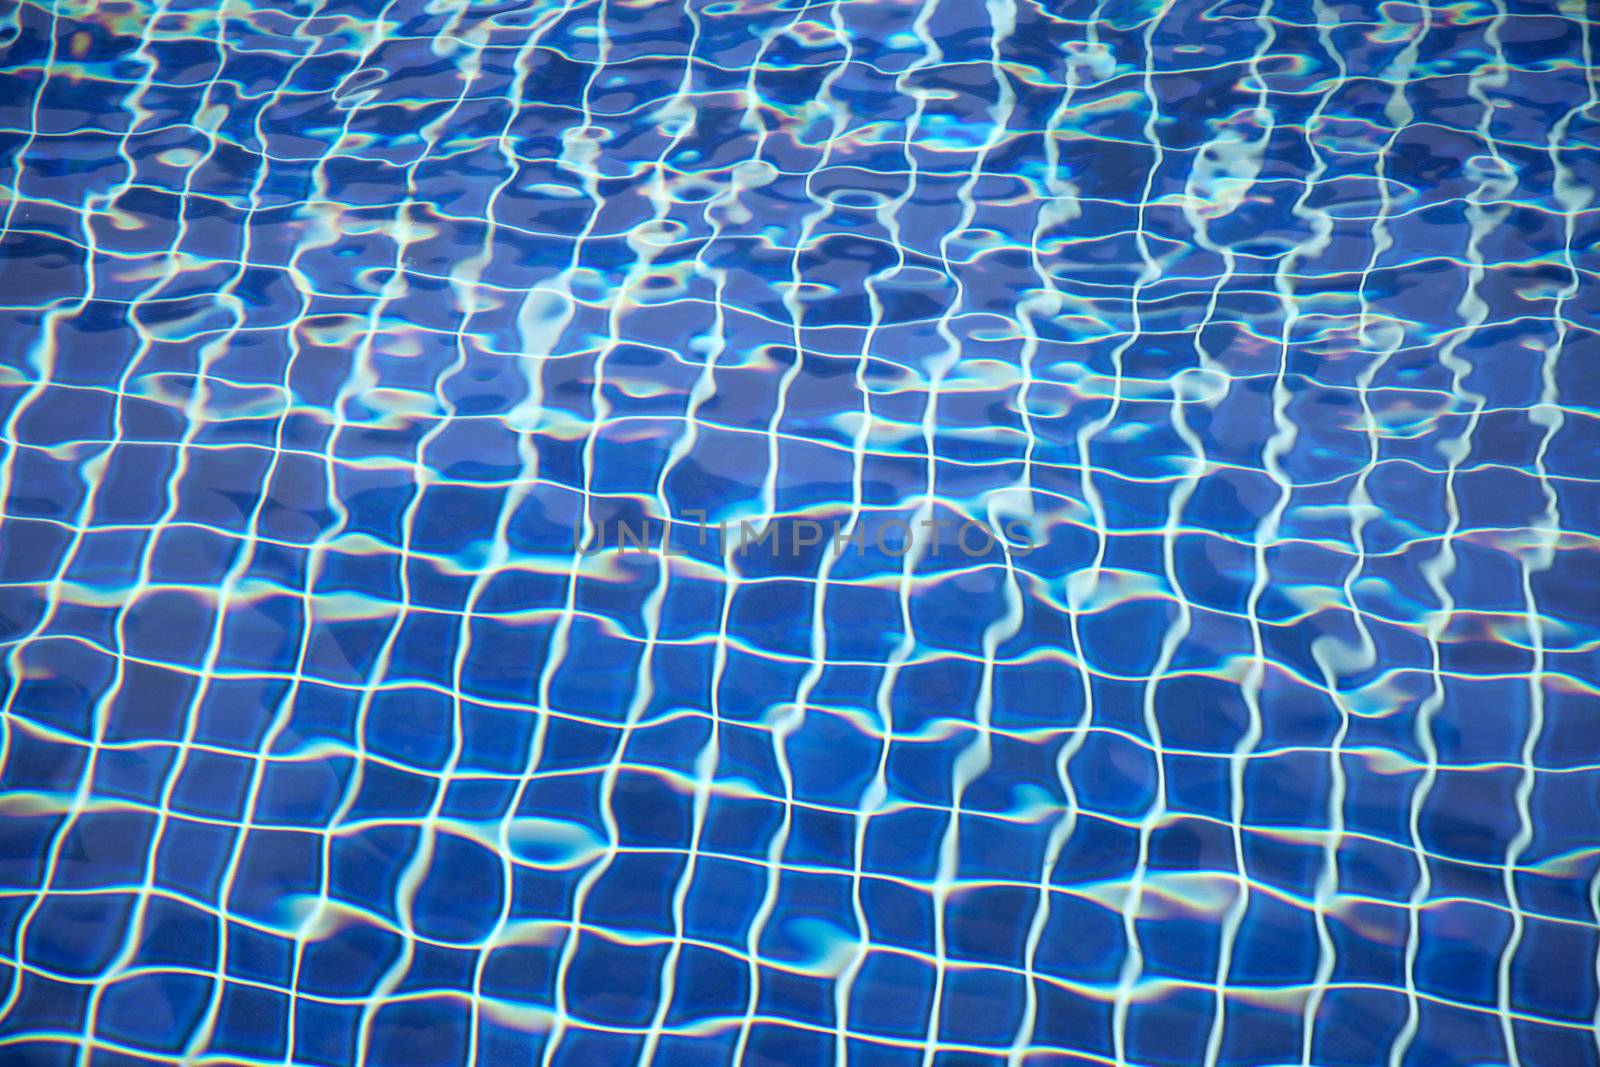 Swimming pool background with tiles